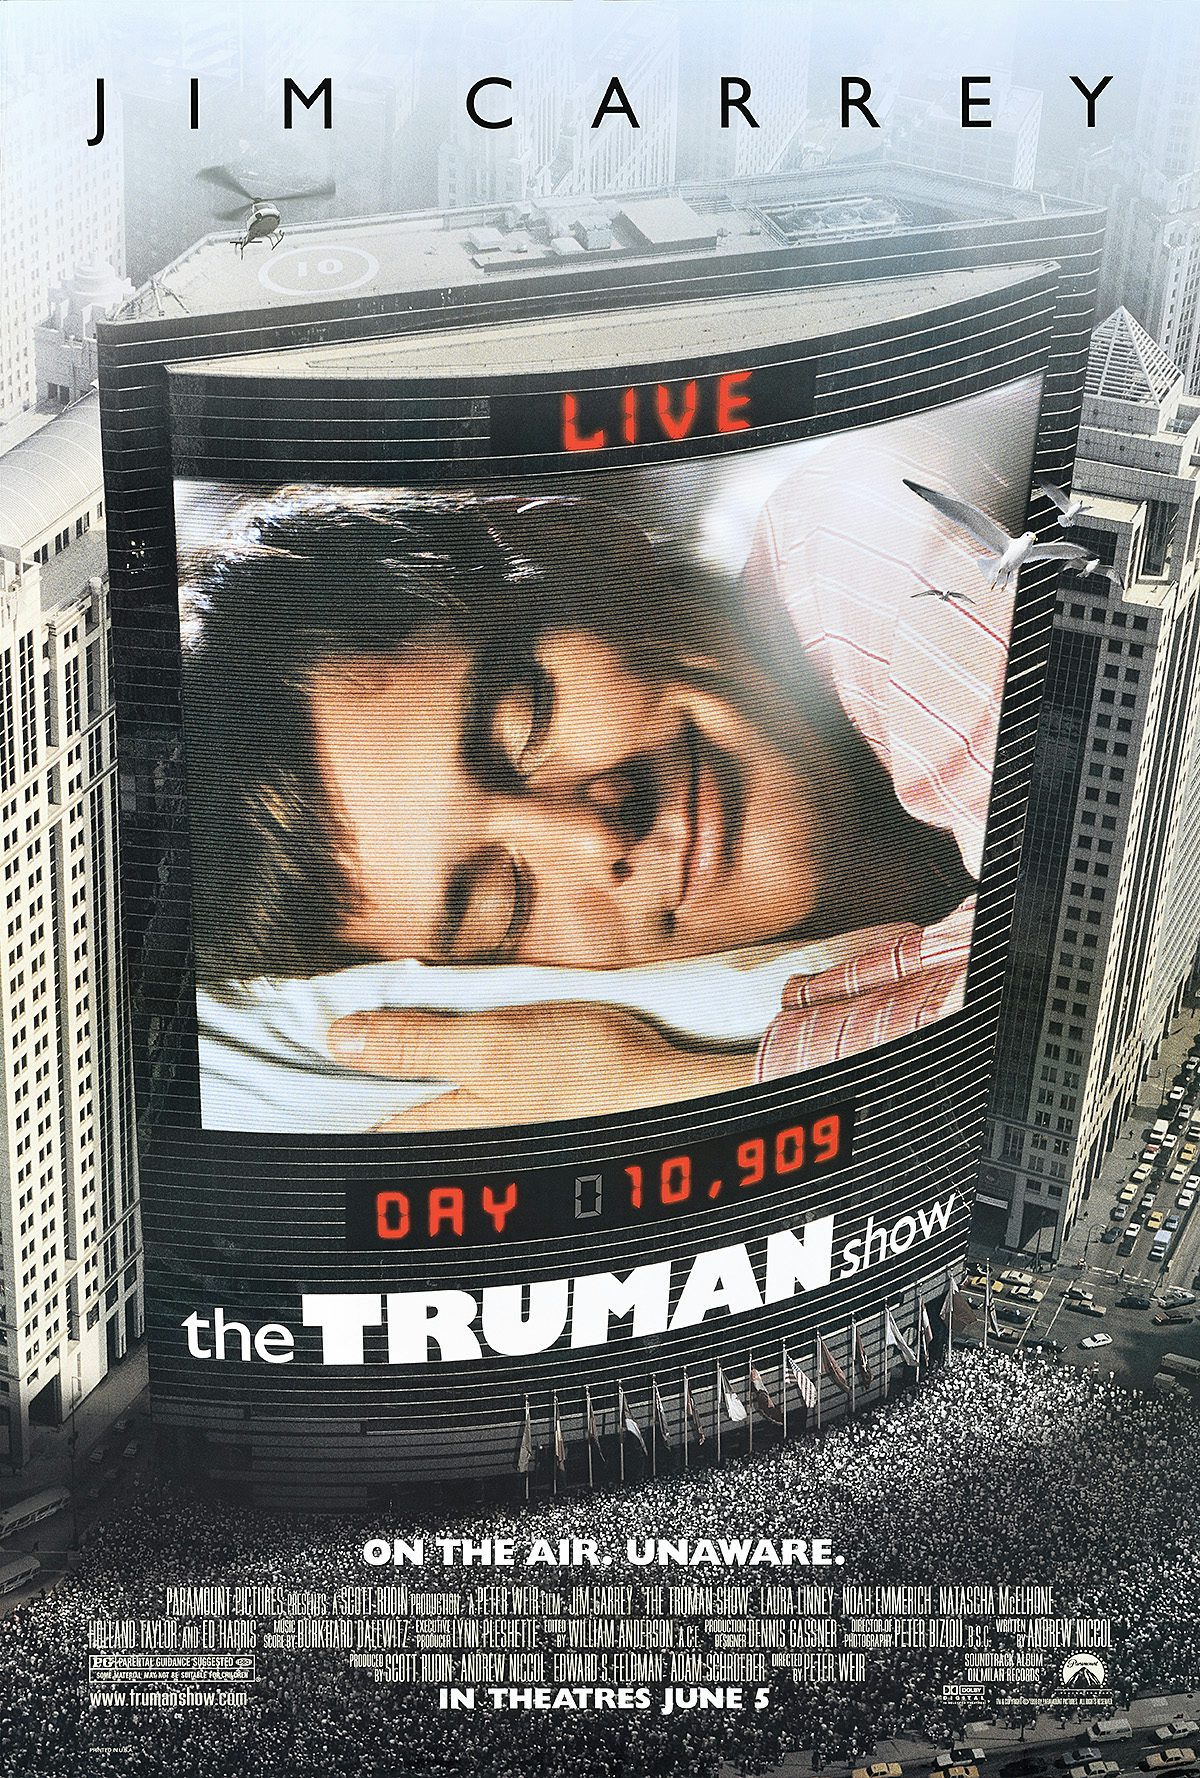 Poster design for The Truman Show, featuring a photo of star Jim Carrey asleep, which appears to be showing on a large public live billboard. The copy reads 'On the air, unaware'